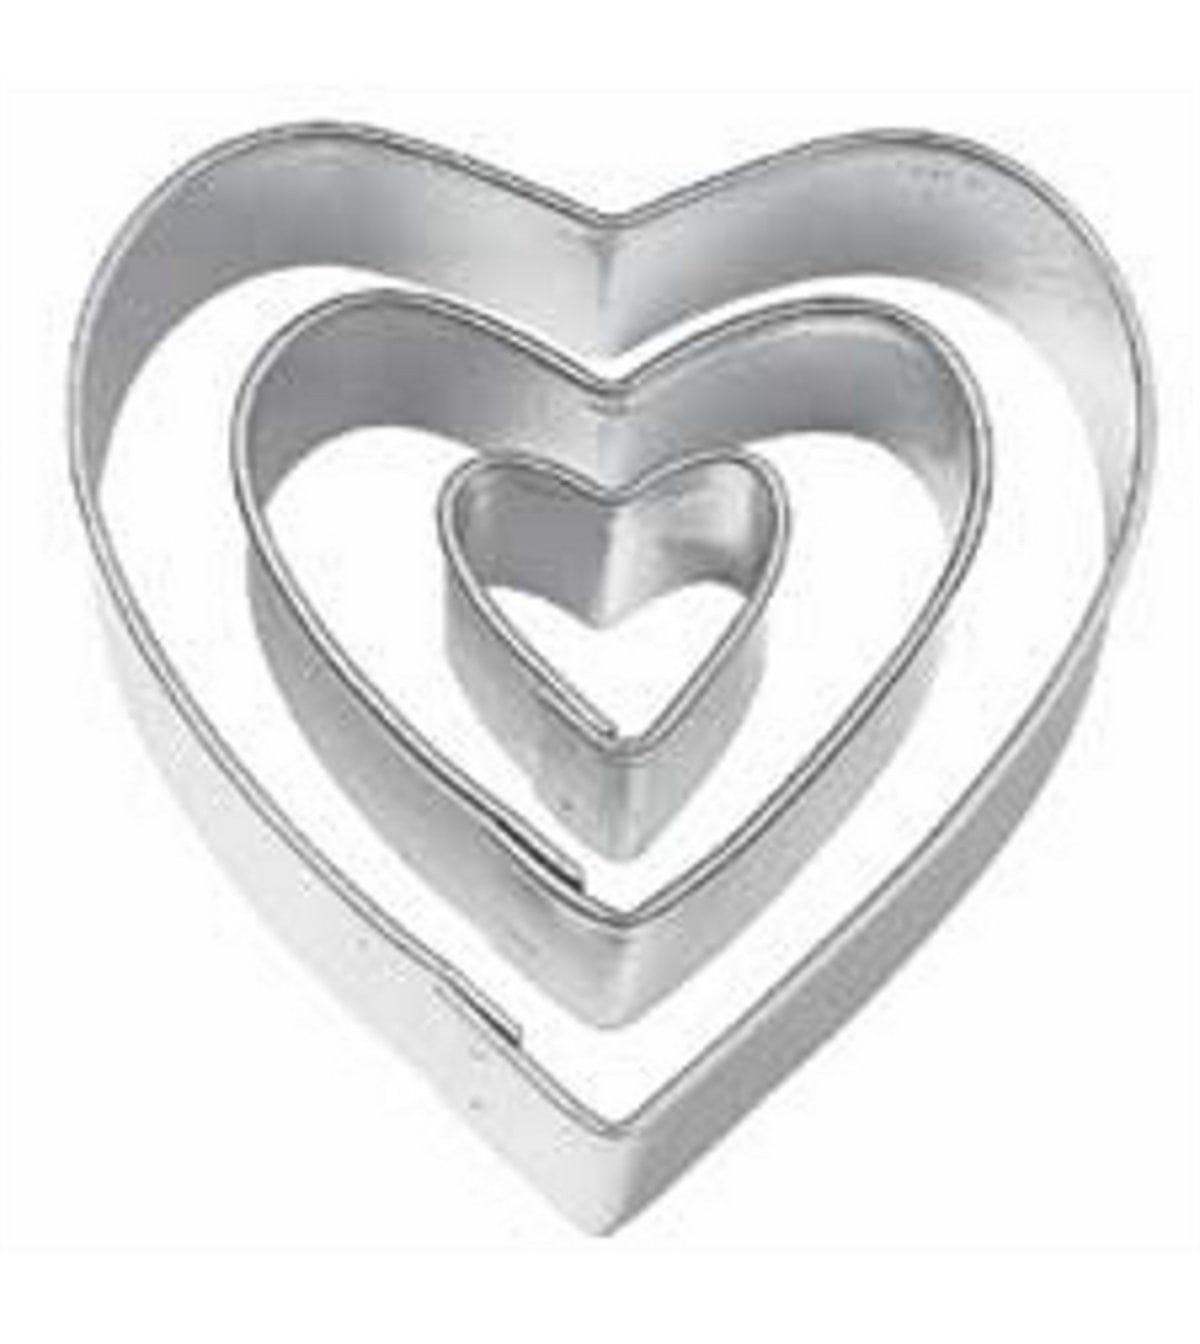 Set Of 3 Heart Cookie Cutters